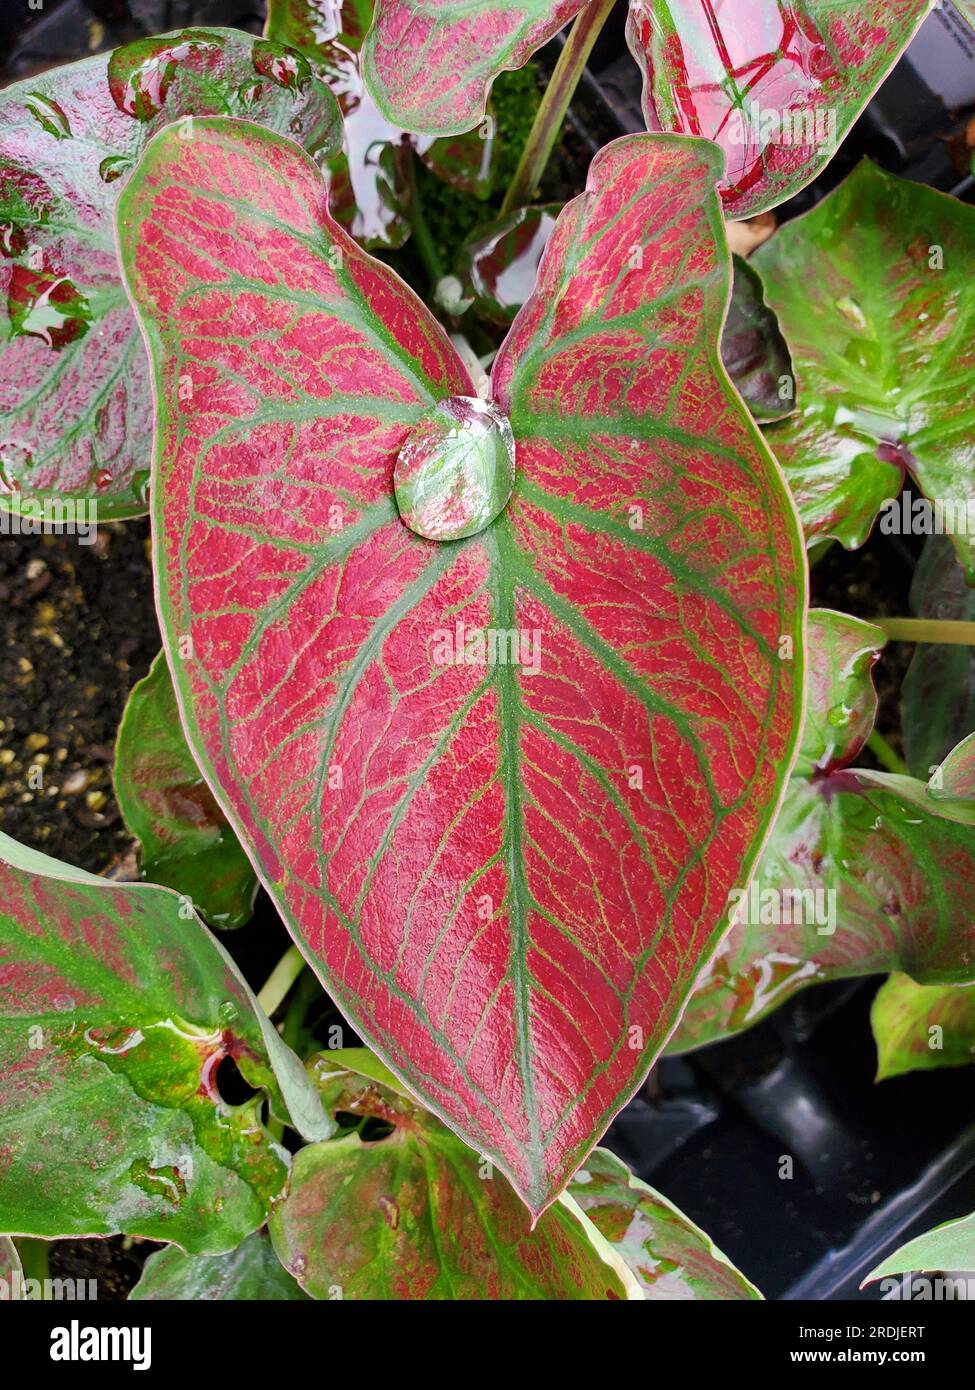 A red and green veins of Fallen City Caladium Stock Photo